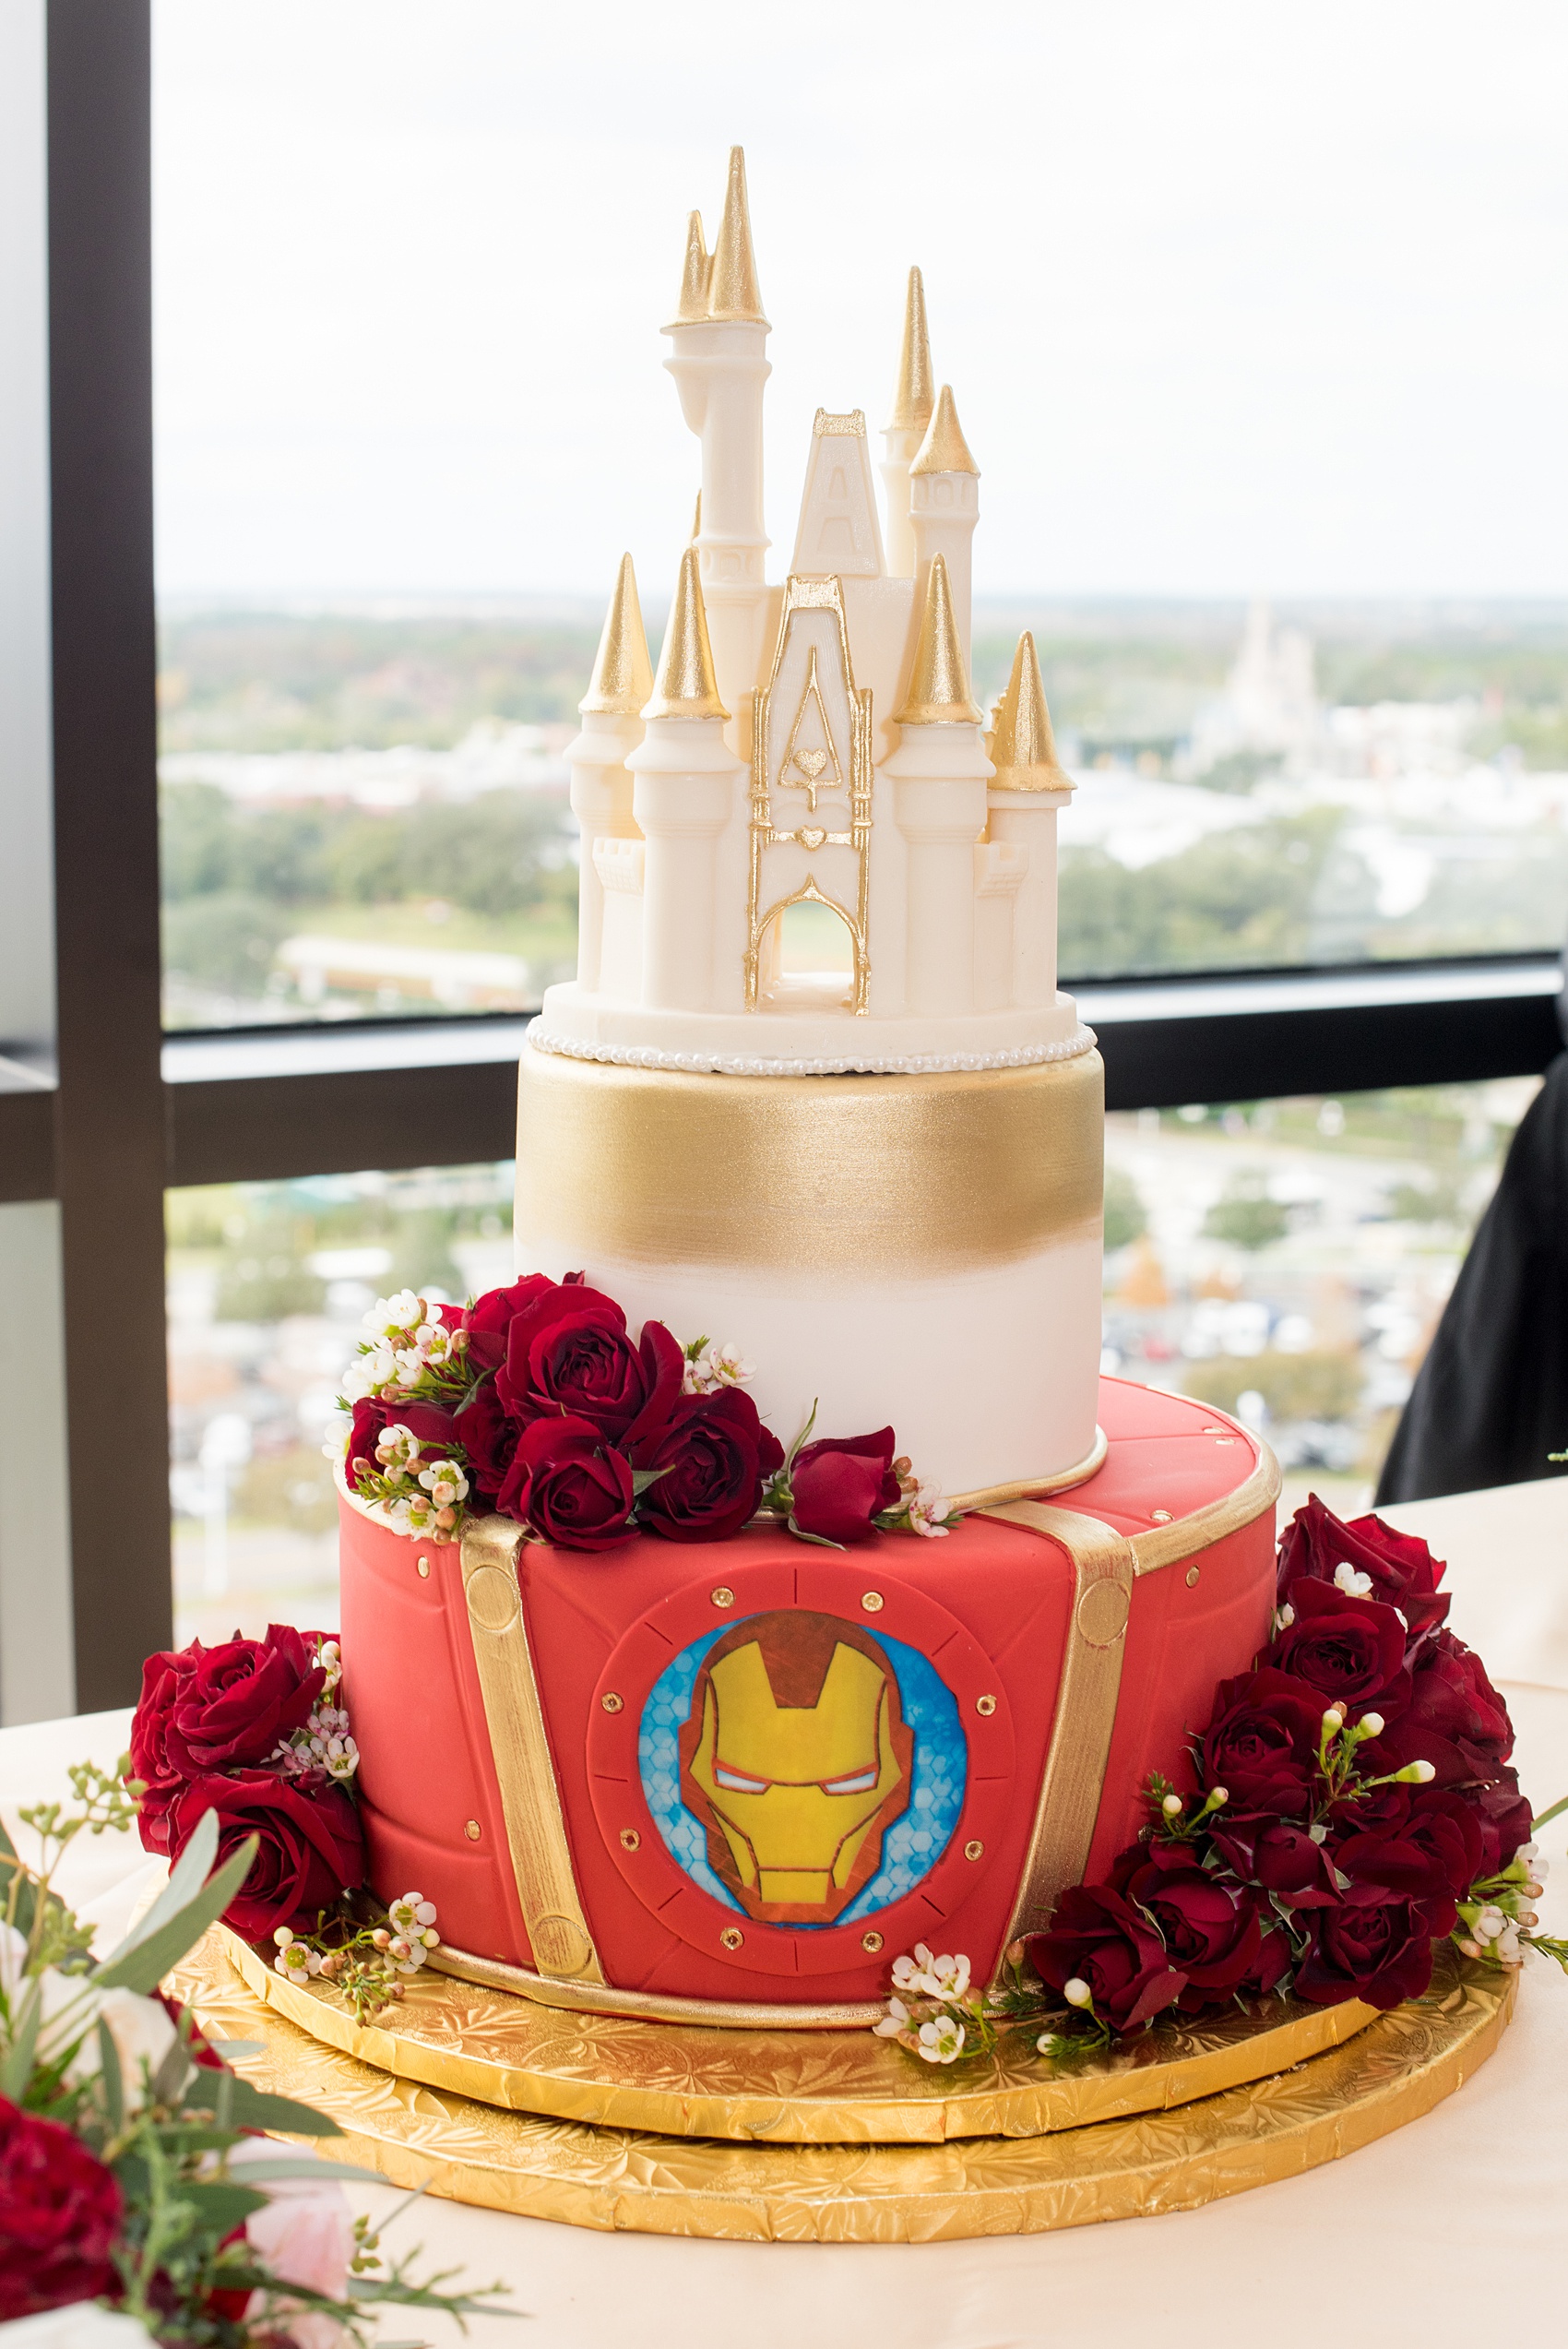 Photographs of a Walt Disney World wedding by Mikkel Paige Photography will give you ideas for a tasteful theme. The bride and groom’s cake had red fondant with a Marvel Iron Man emblem. The top had a white chocolate Cinderella Castle with a brush of gold for a small reception celebration. #disneywedding #DisneyCake #DisneyWorldWedding #Disneyreception #californiagrill #ContemporaryResort #disneyweddingcake #MarvelWeddingCake #CinderellaCastleCake